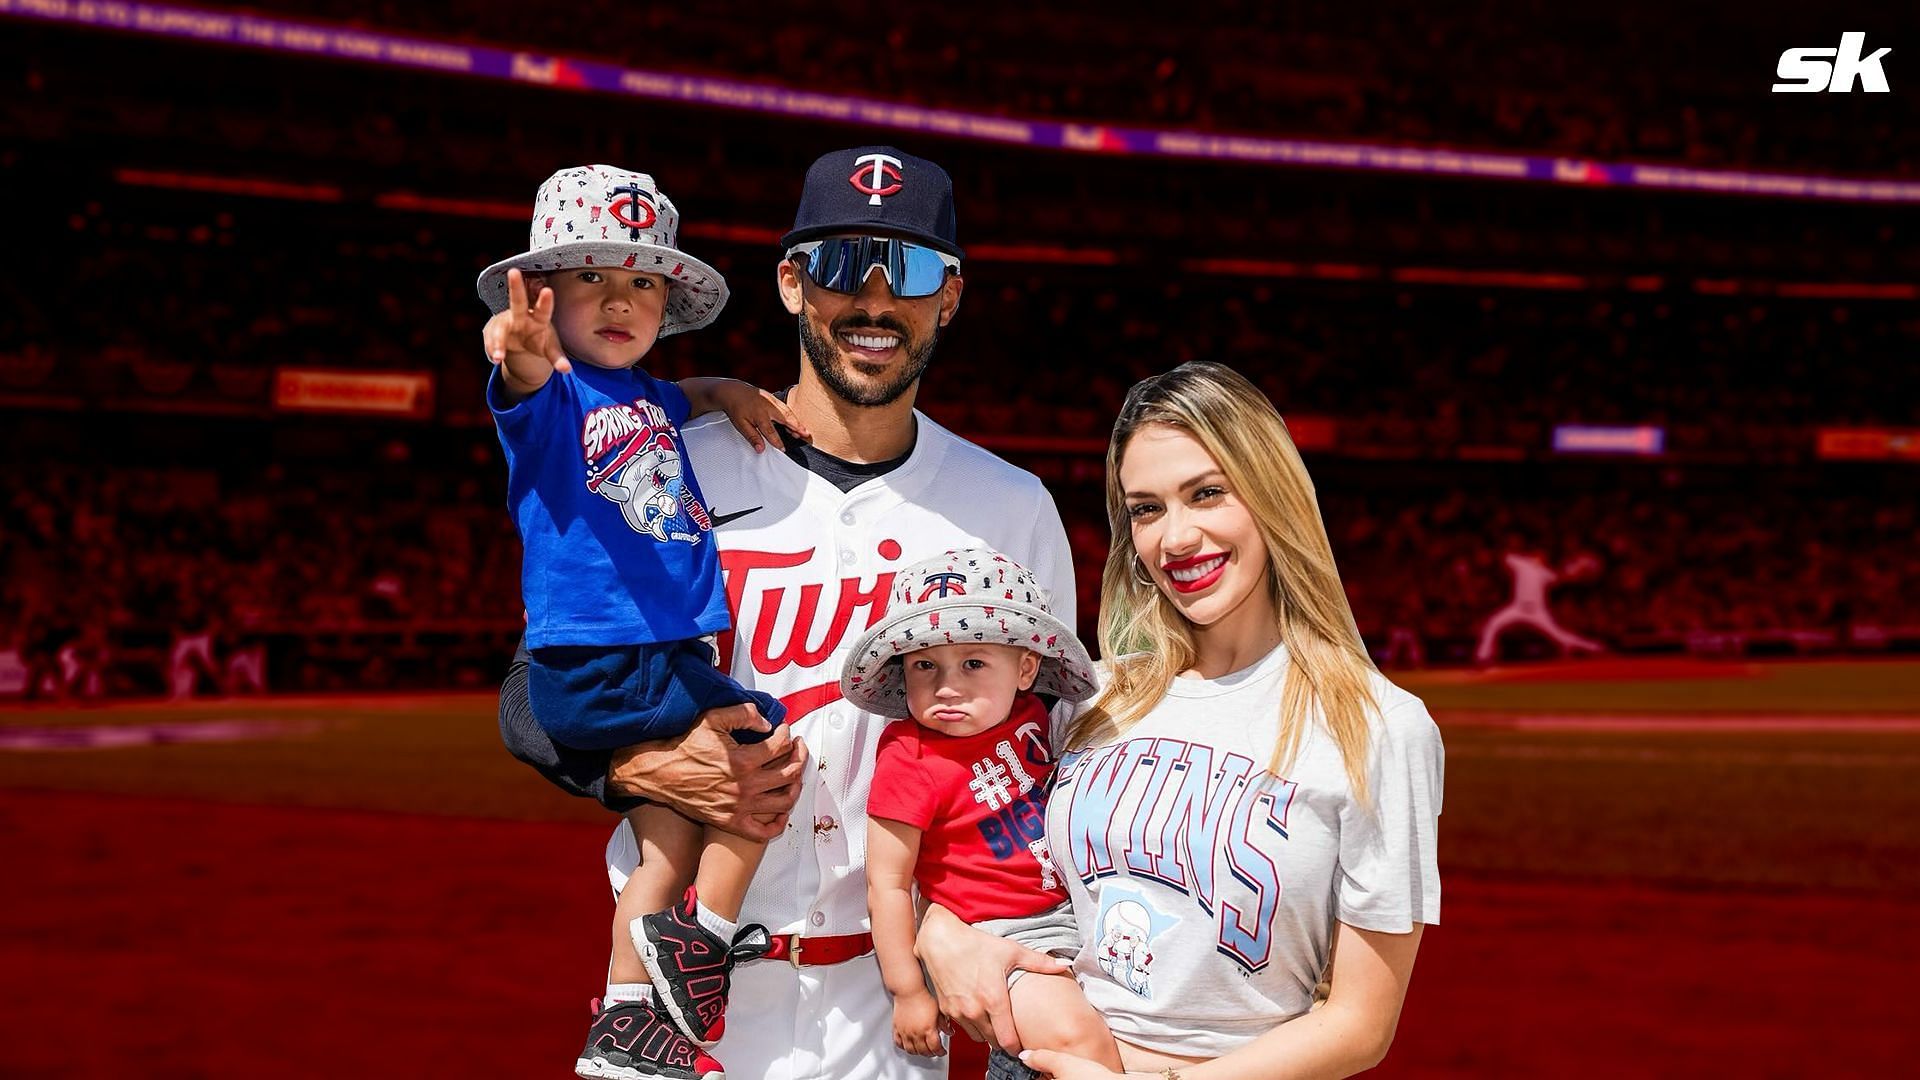 Carlos Correas wife Danielle shared some warming pictures of their children alongside their father at spring training